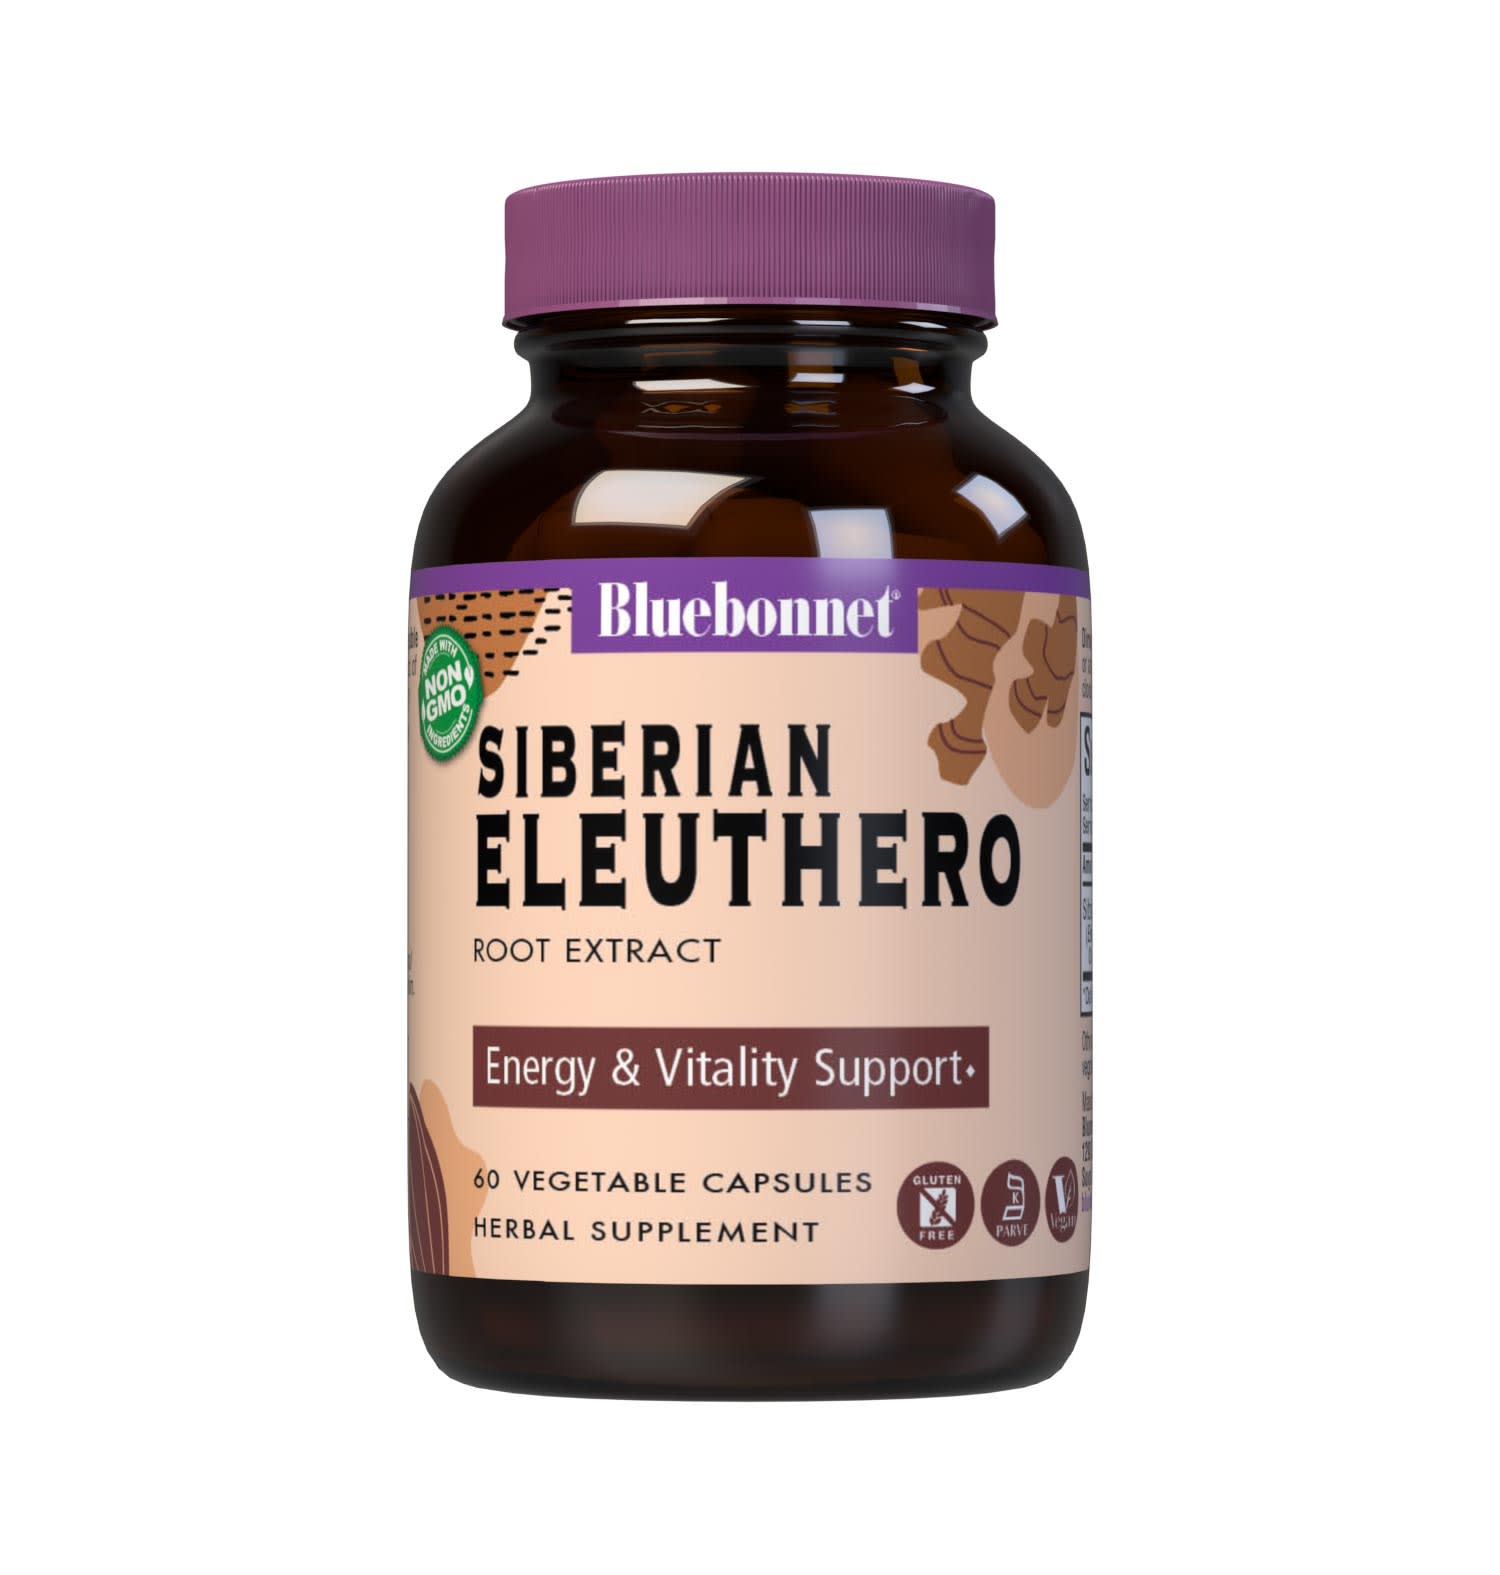 Bluebonnet’s Siberian Eleuthero Root Extract 60 Vegetable Capsules are formulated with a standardized extract of eleutherosides, the most researched active constituents found in Siberian eleuthero root. A clean and gentle water-based extraction method is employed to capture and preserve Siberian eleuthero root’s most valuable components. #size_60 count